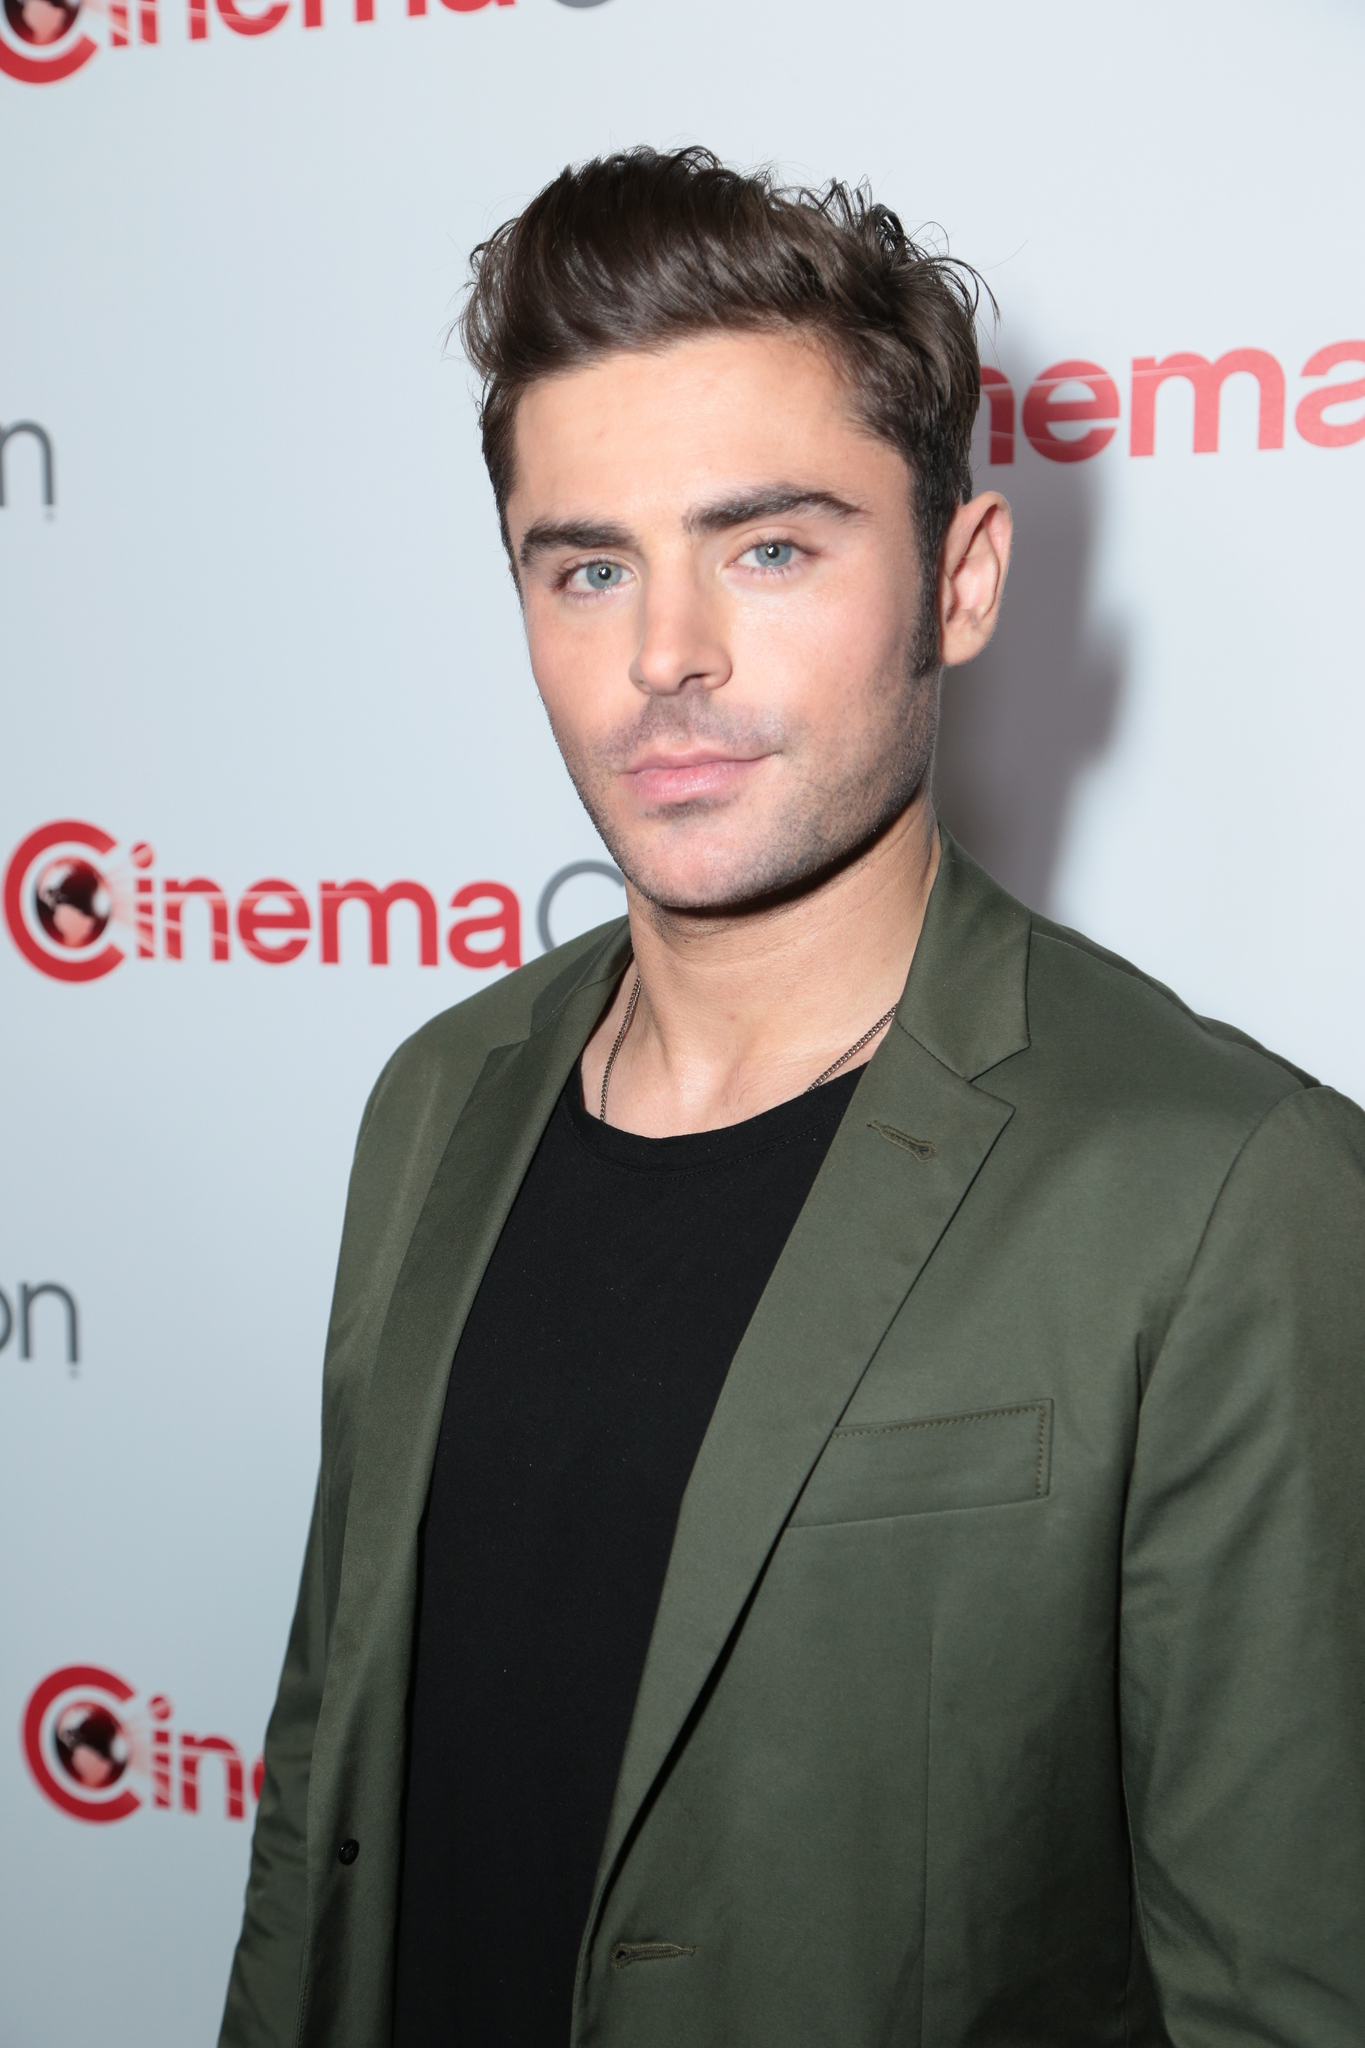 Zac Efron has been in a recent highlight for his relationship status.